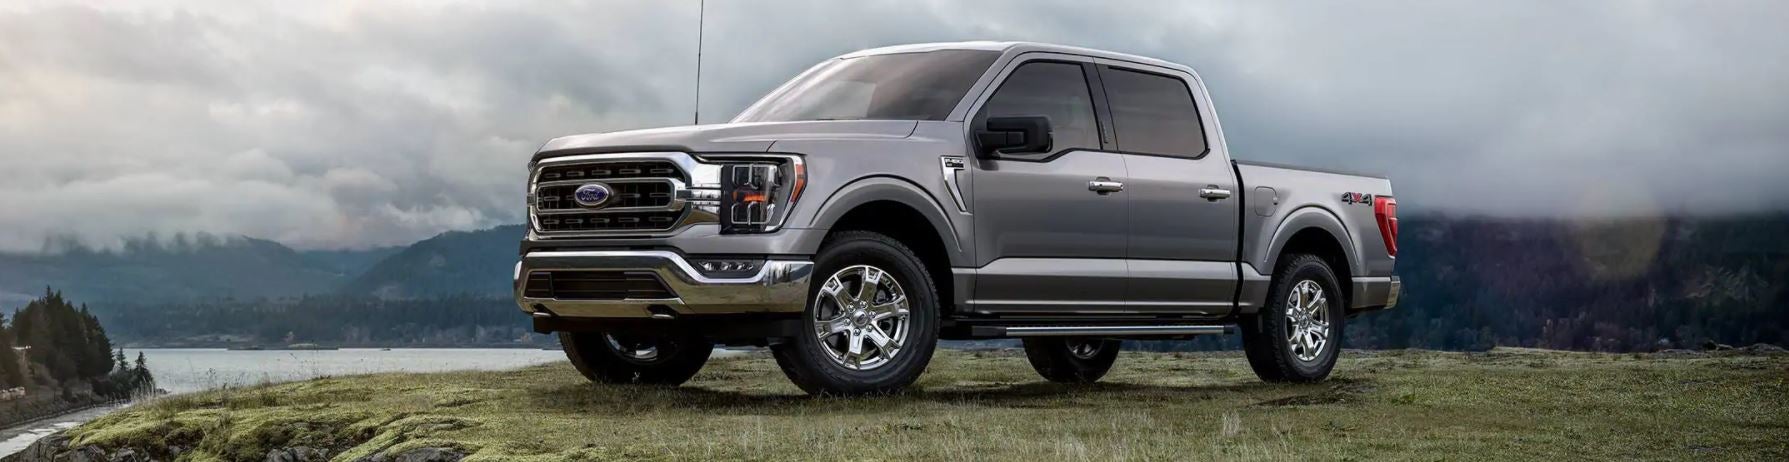 2021 Ford F 150 Model Review At Buster Miles Ford In Heflin Al